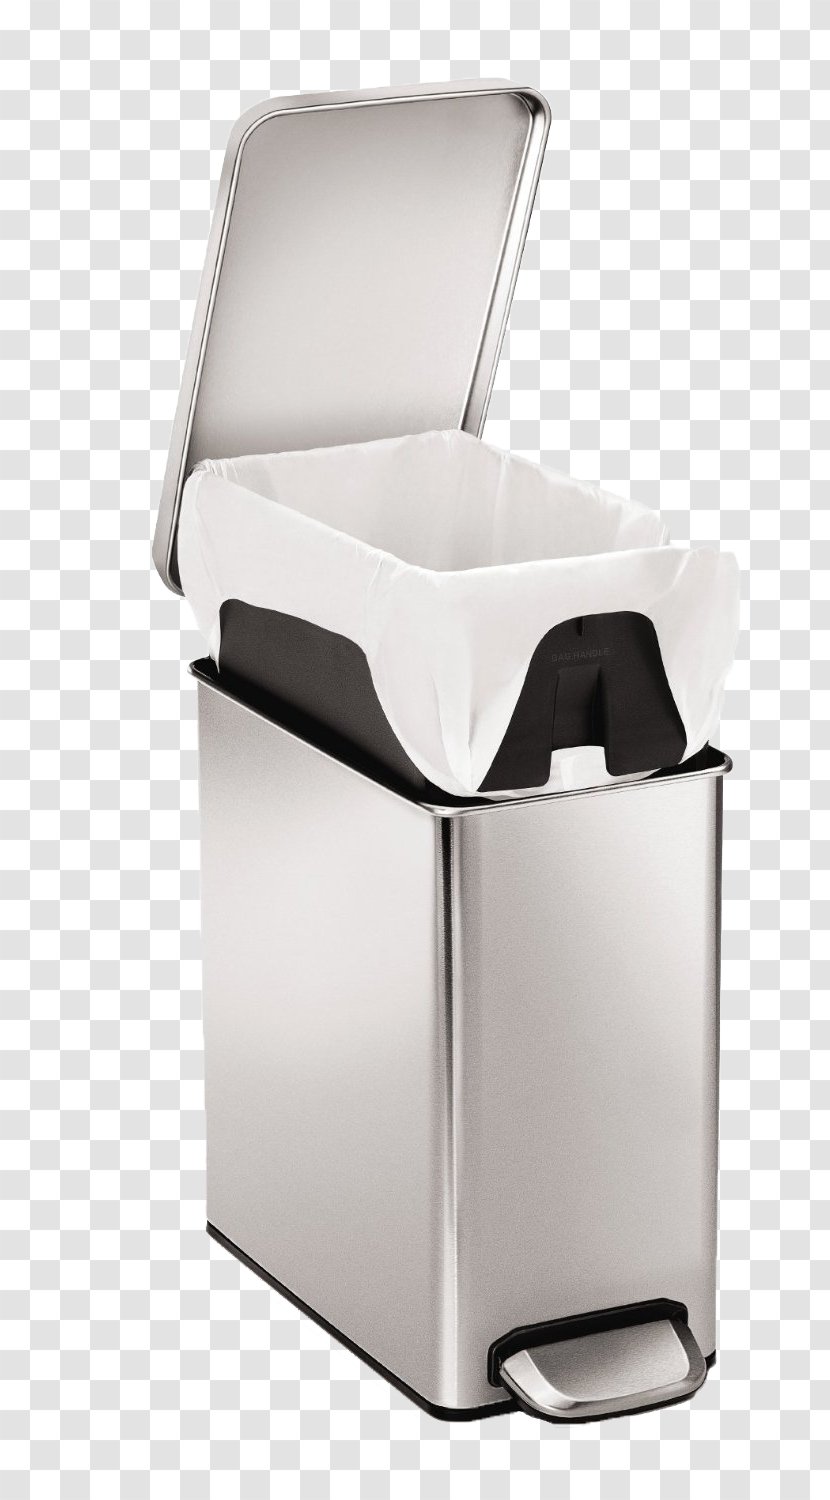 Waste Container Simplehuman Stainless Steel Liter - Bin Bag - Covered Trash Can Mute Transparent PNG